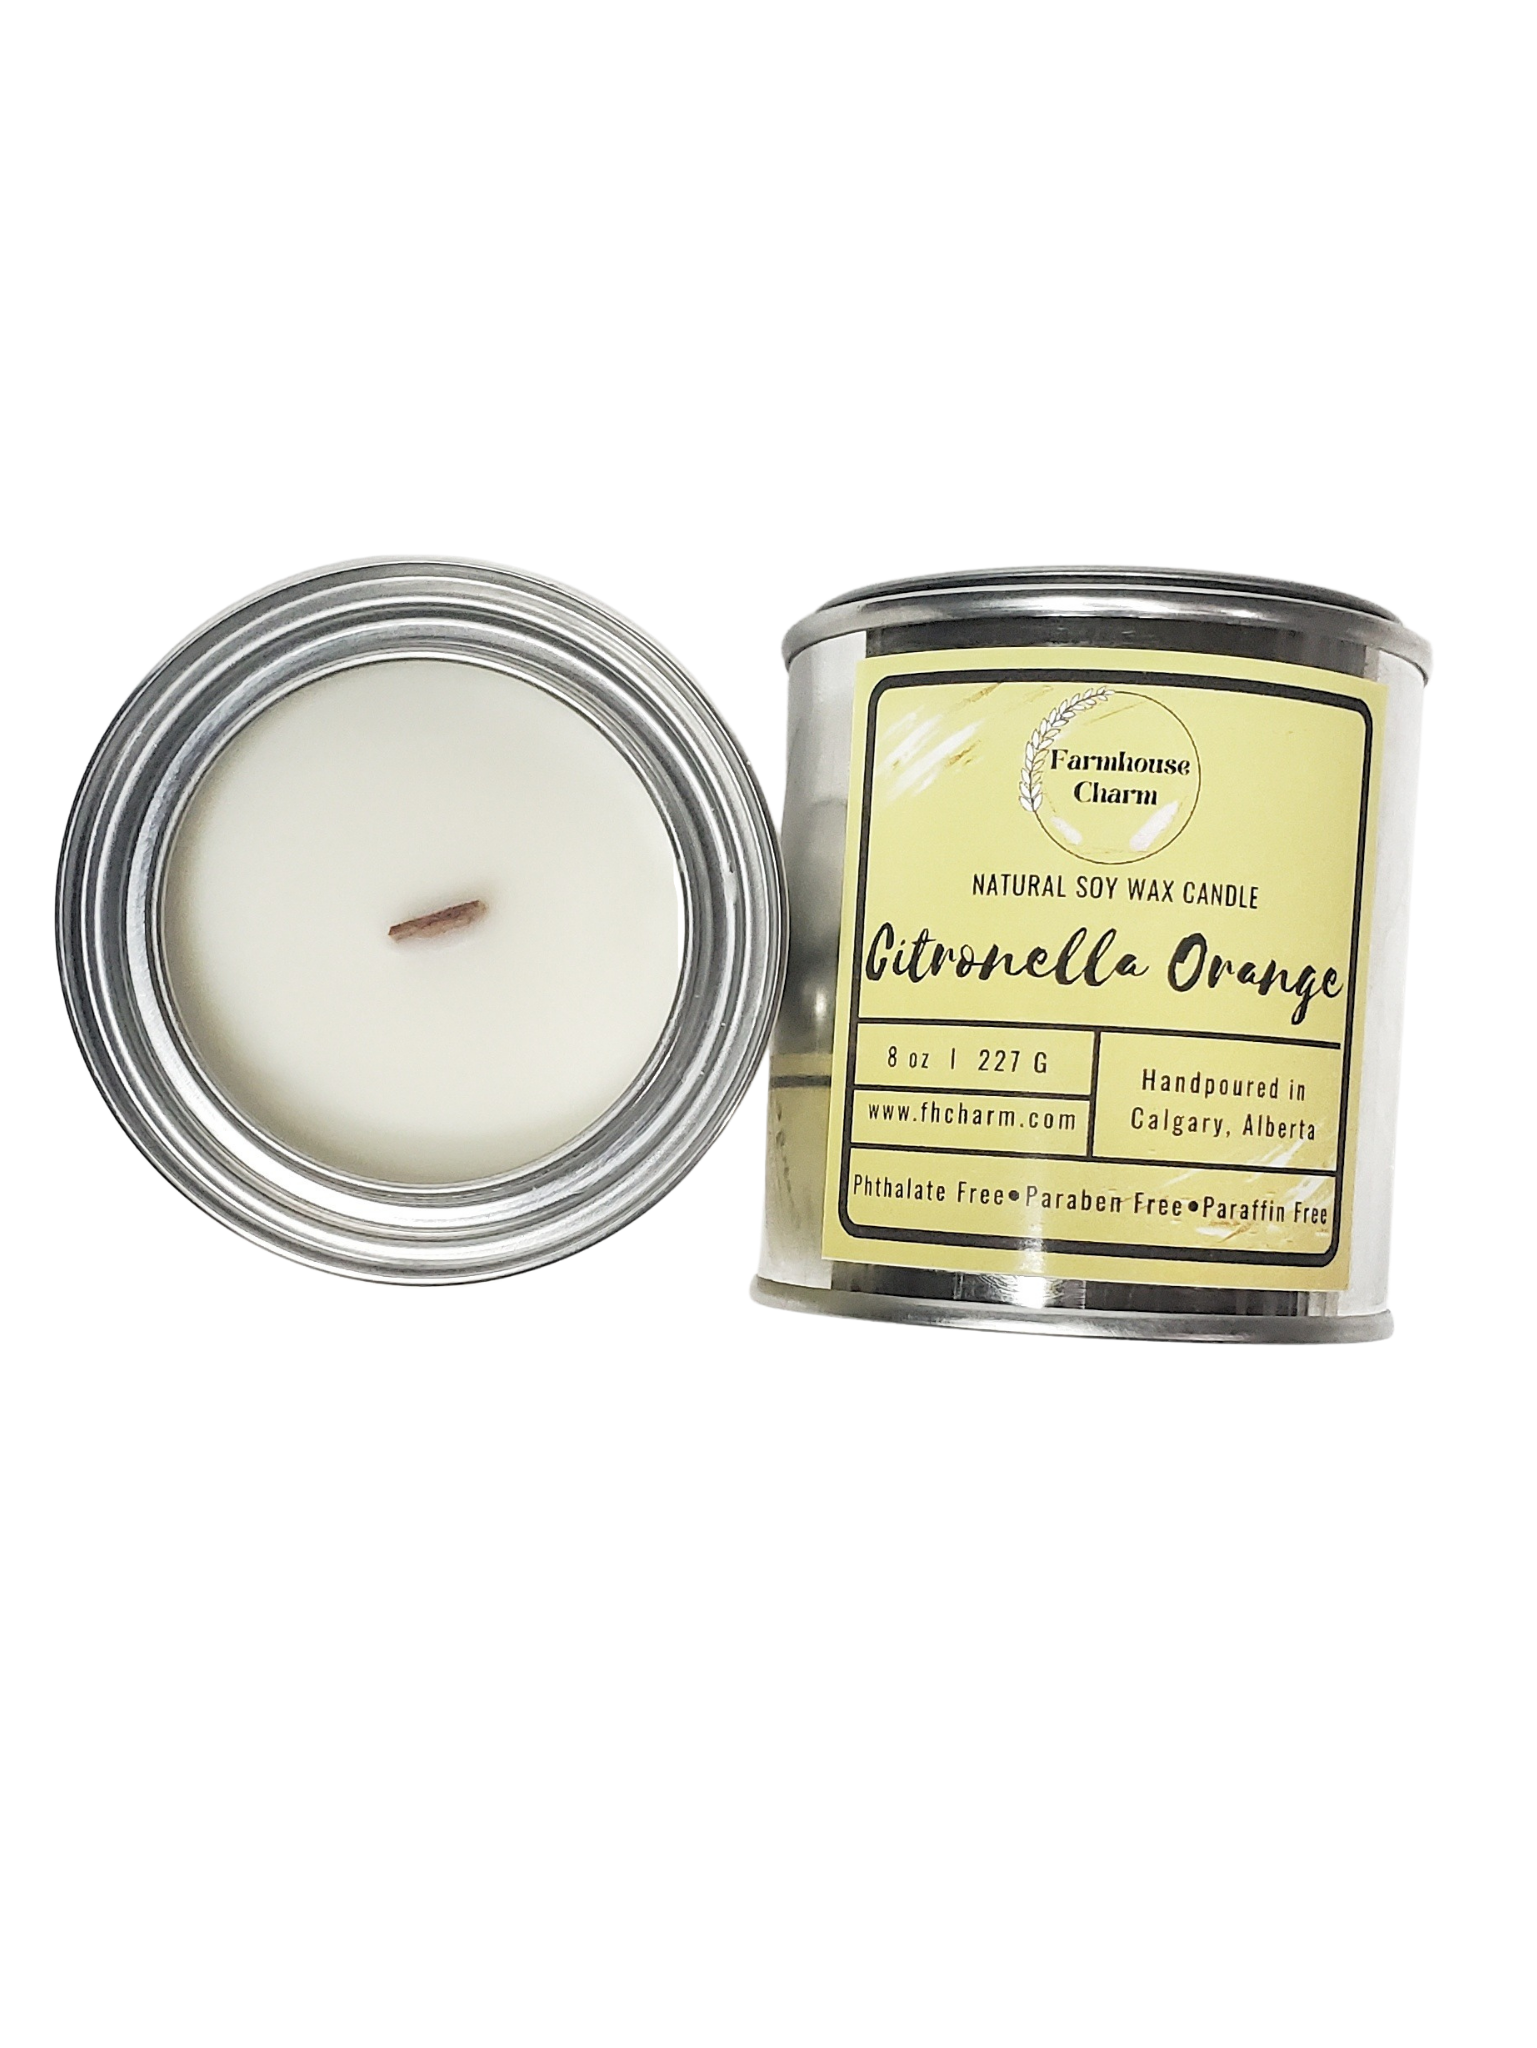 Keep the mosquitos away with this outdoor Citronella Orange- Farmhouse Charm Natural Soy Candle. Its a blend of citrusy orange and bug repellant citronella.   size: 8 oz. (227 g)  Citronella Orange- Farmhouse Charm Natural Soy Candle is made with 100% natural soy wax.  The candle is dye free, paraben free and phthalate free. No other additives added. 